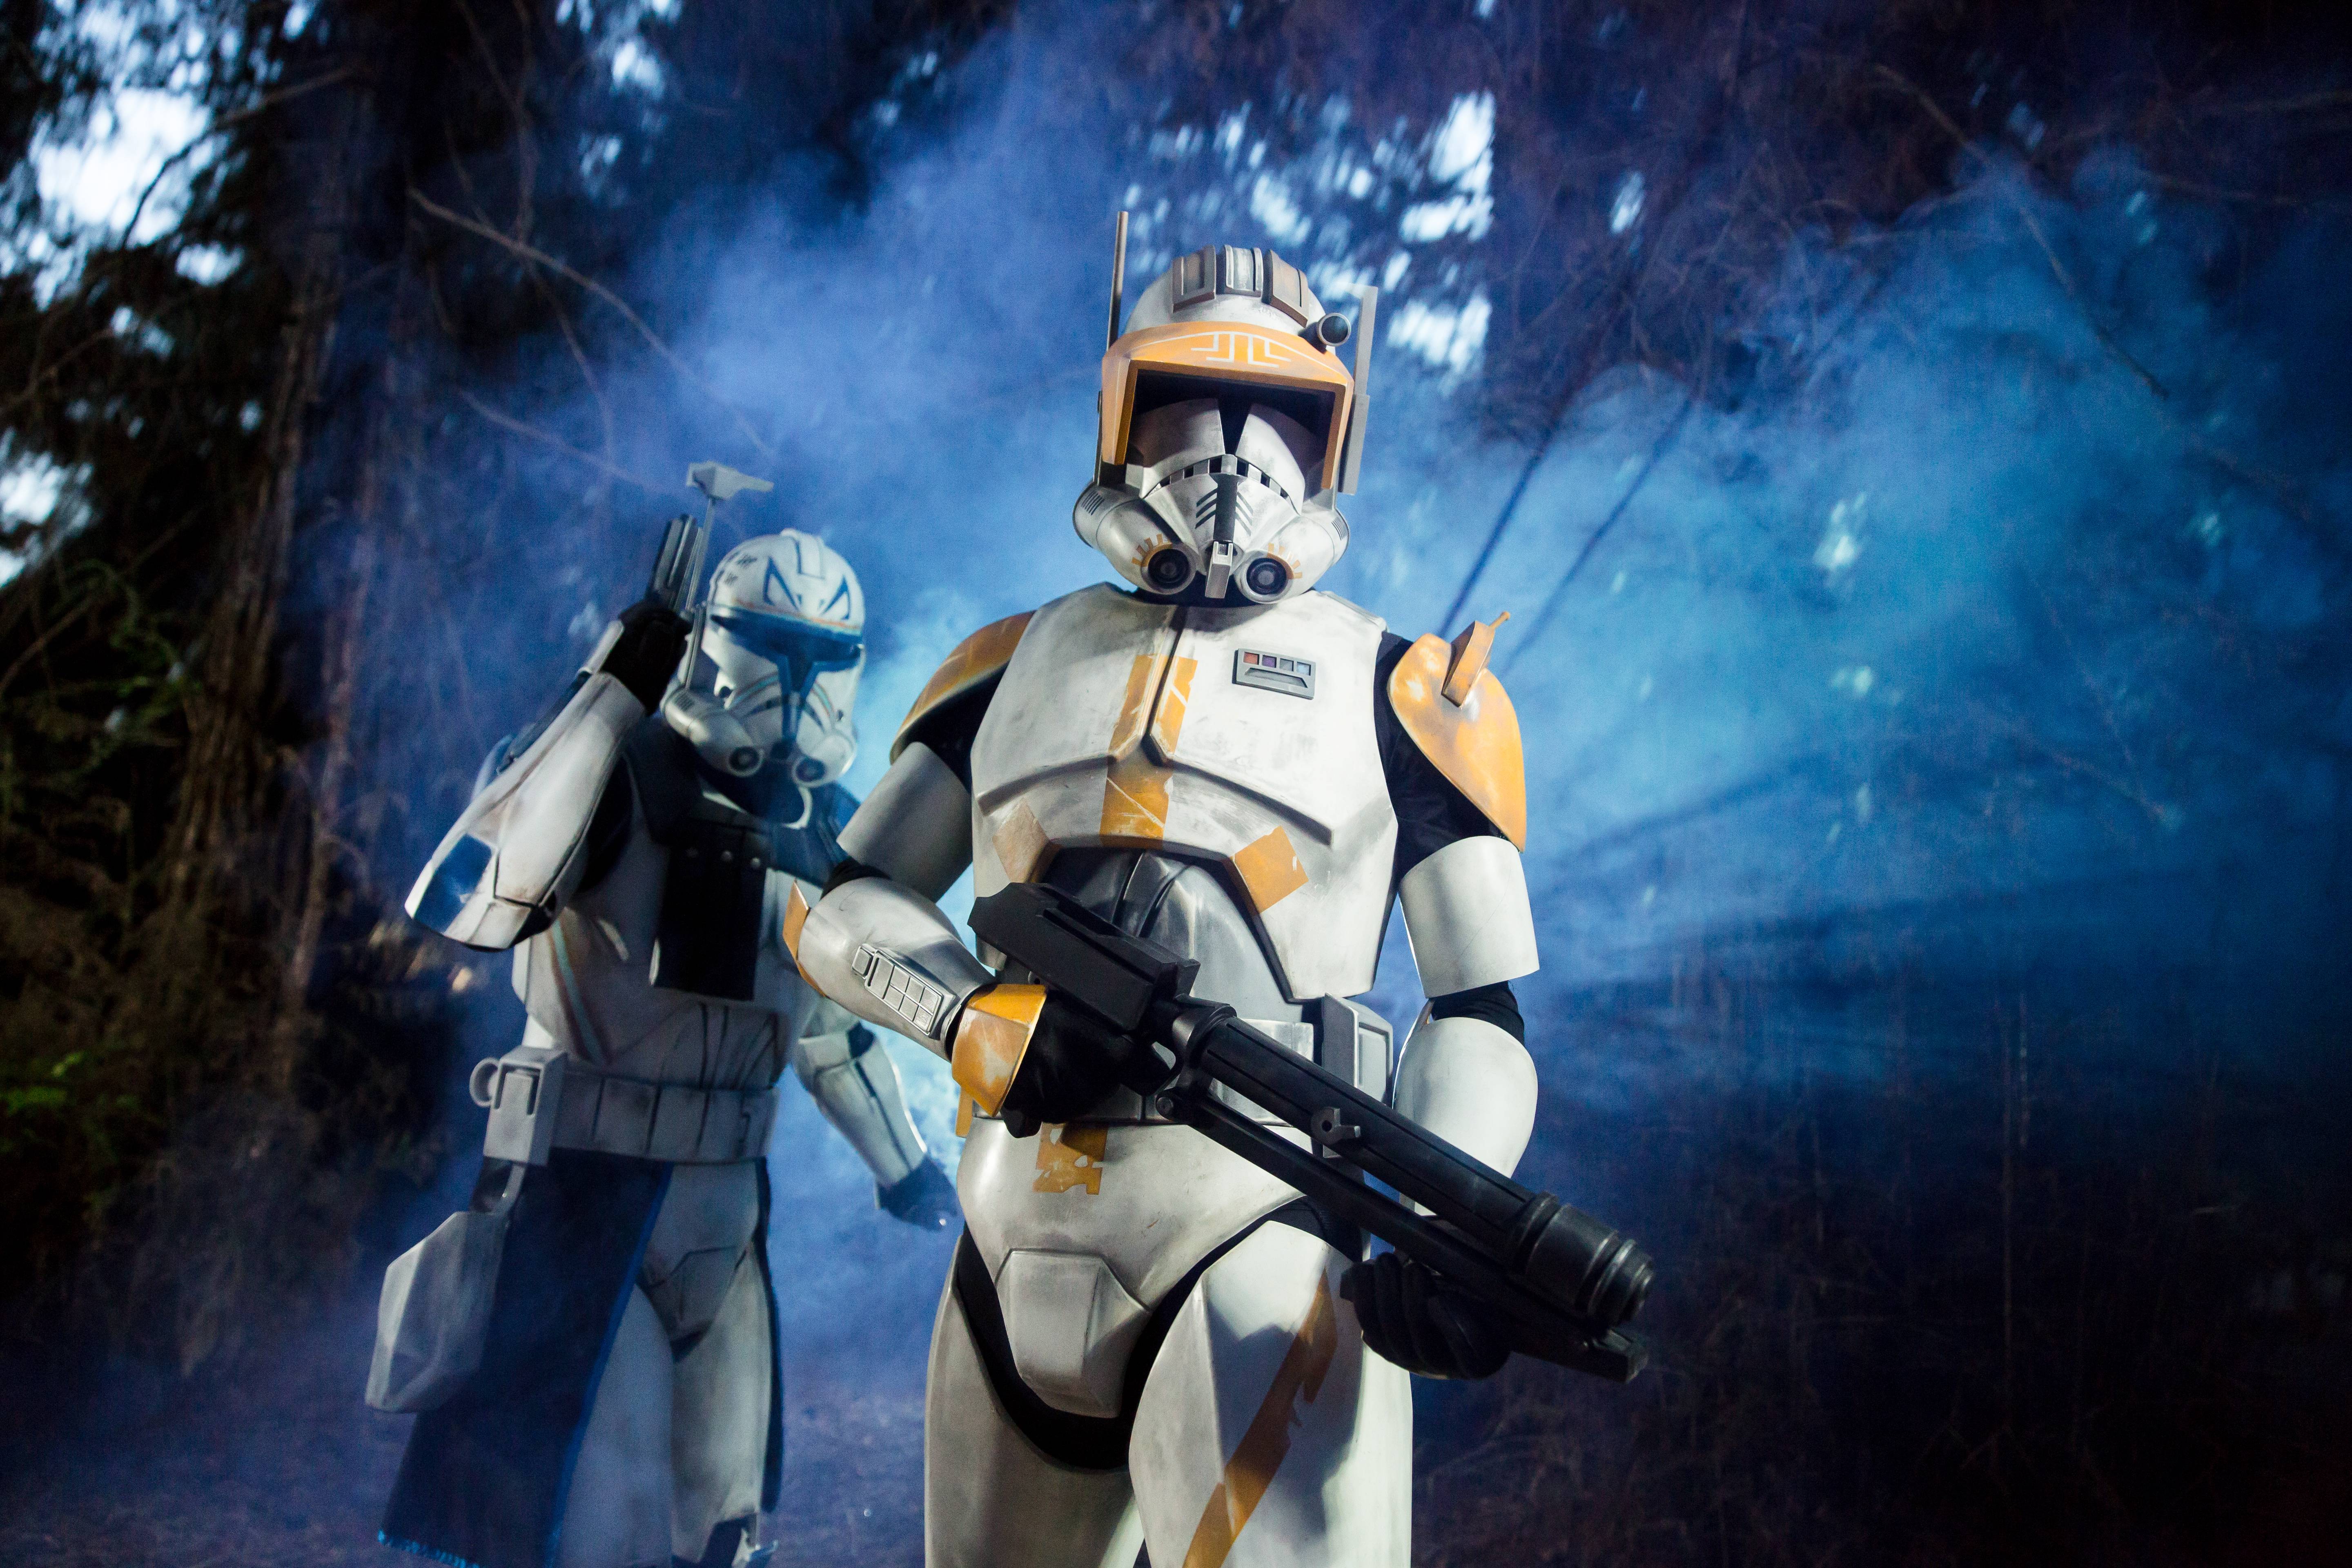 Commander Cody and Captain Rex in Real Life Album